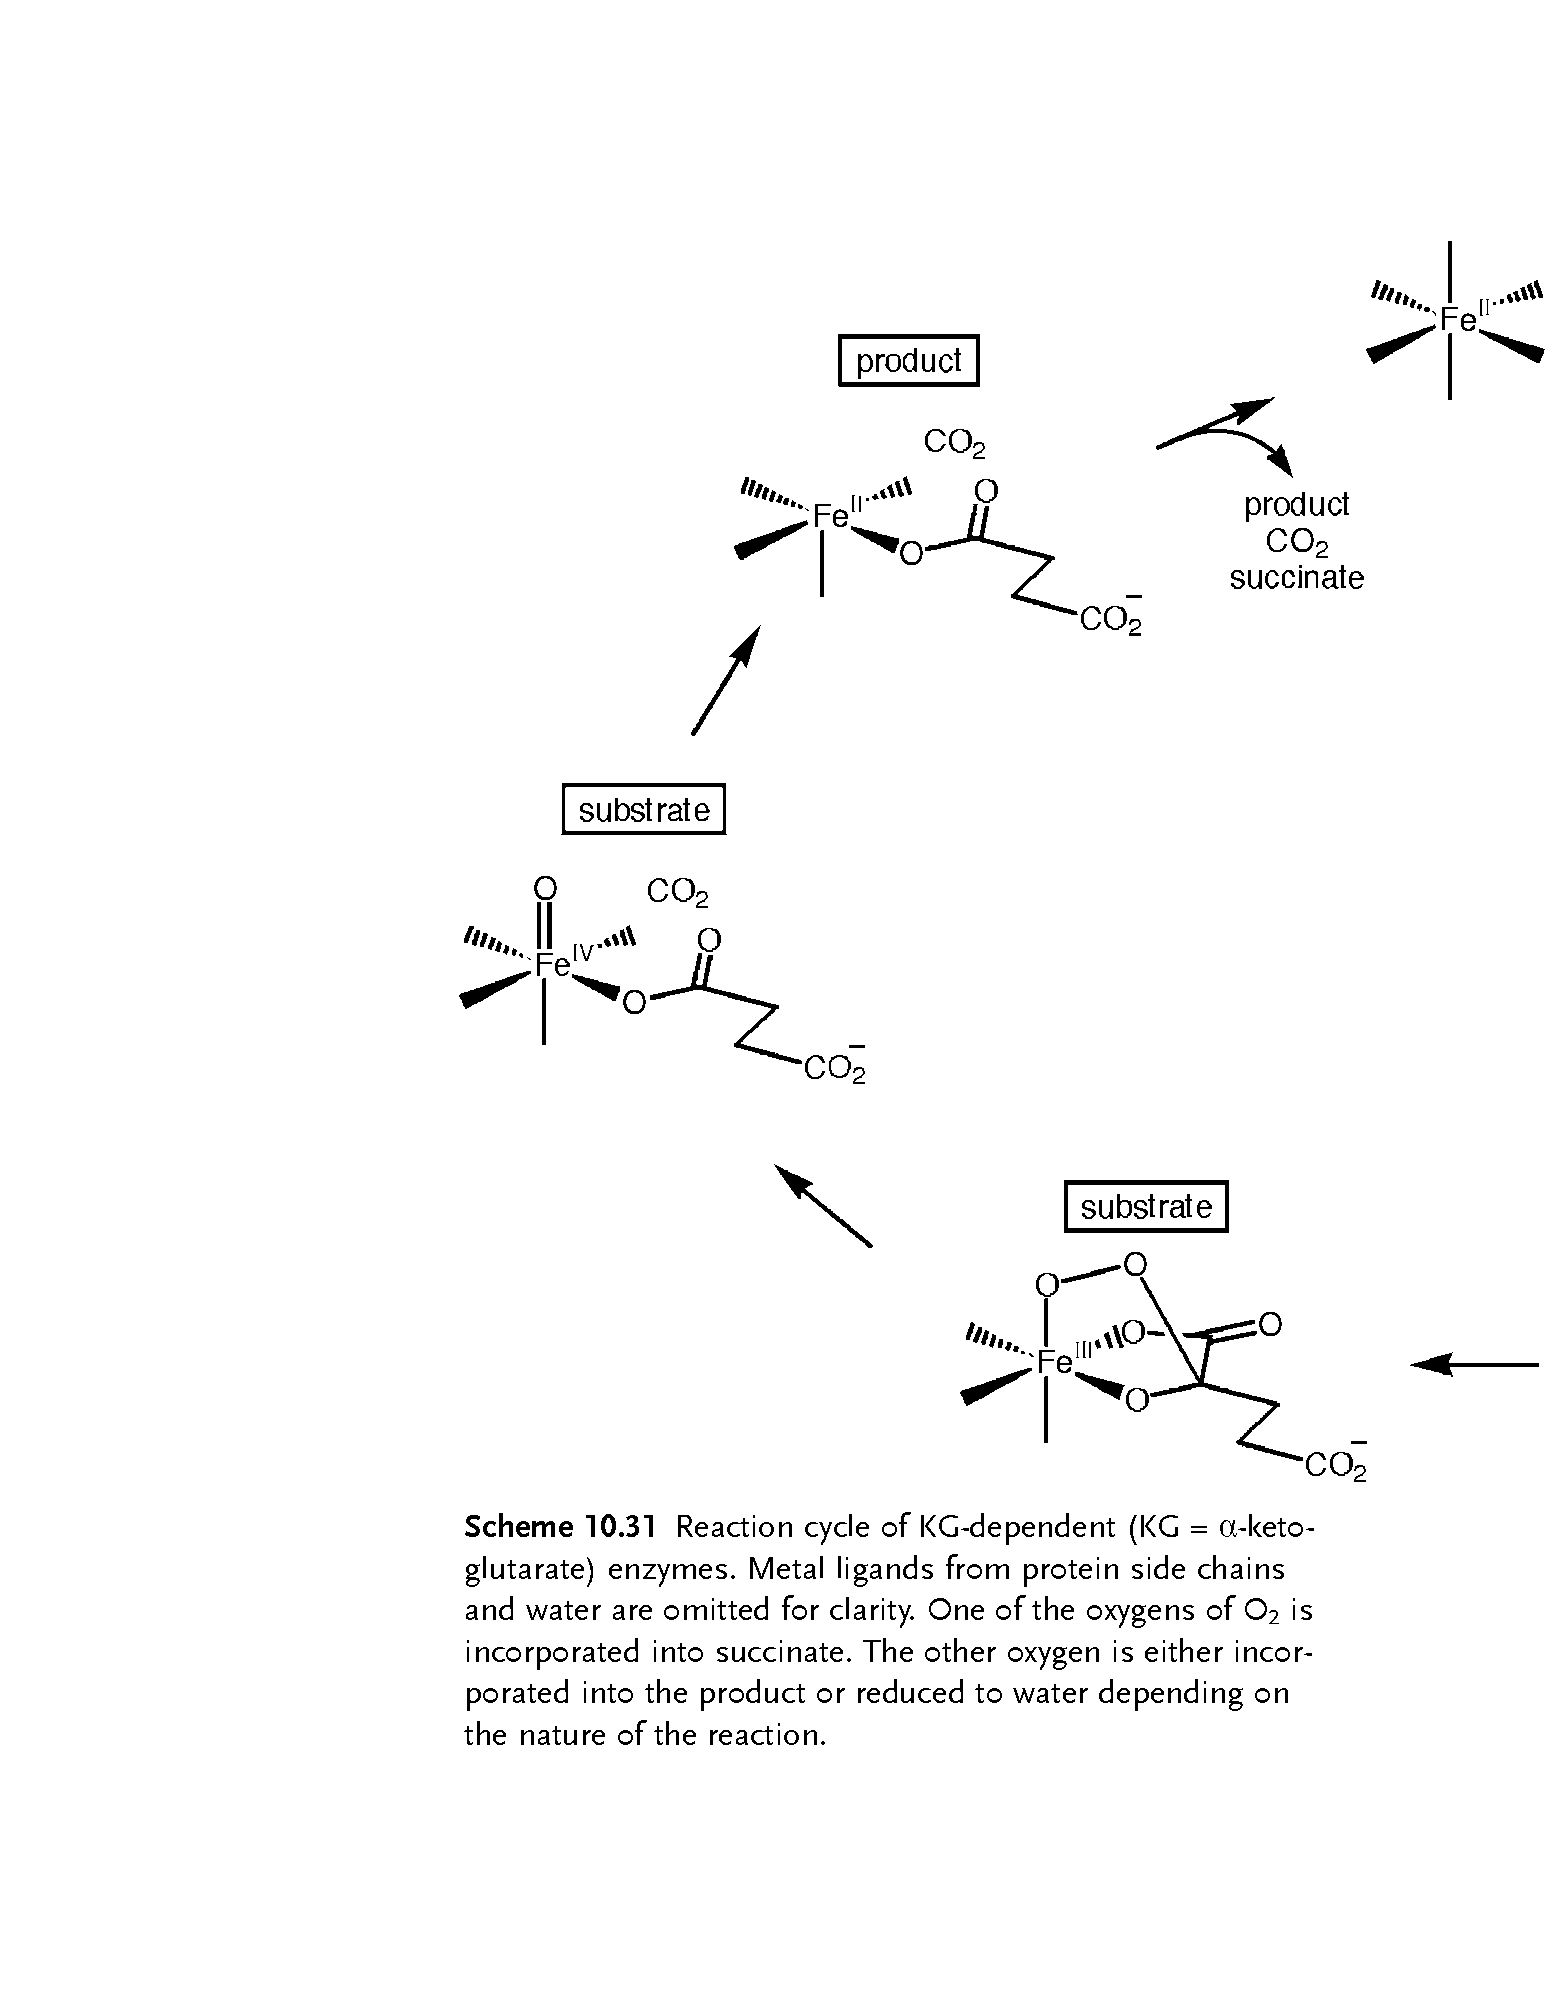 Scheme 10.31 Reaction cycle of KG-dependent (KG = a-keto-glutarate) enzymes. Metal ligands from protein side chains and water are omitted for clarity. One of the oxygens of O2 is incorporated into succinate. The other oxygen is either incorporated into the product or reduced to water depending on the nature of the reaction.